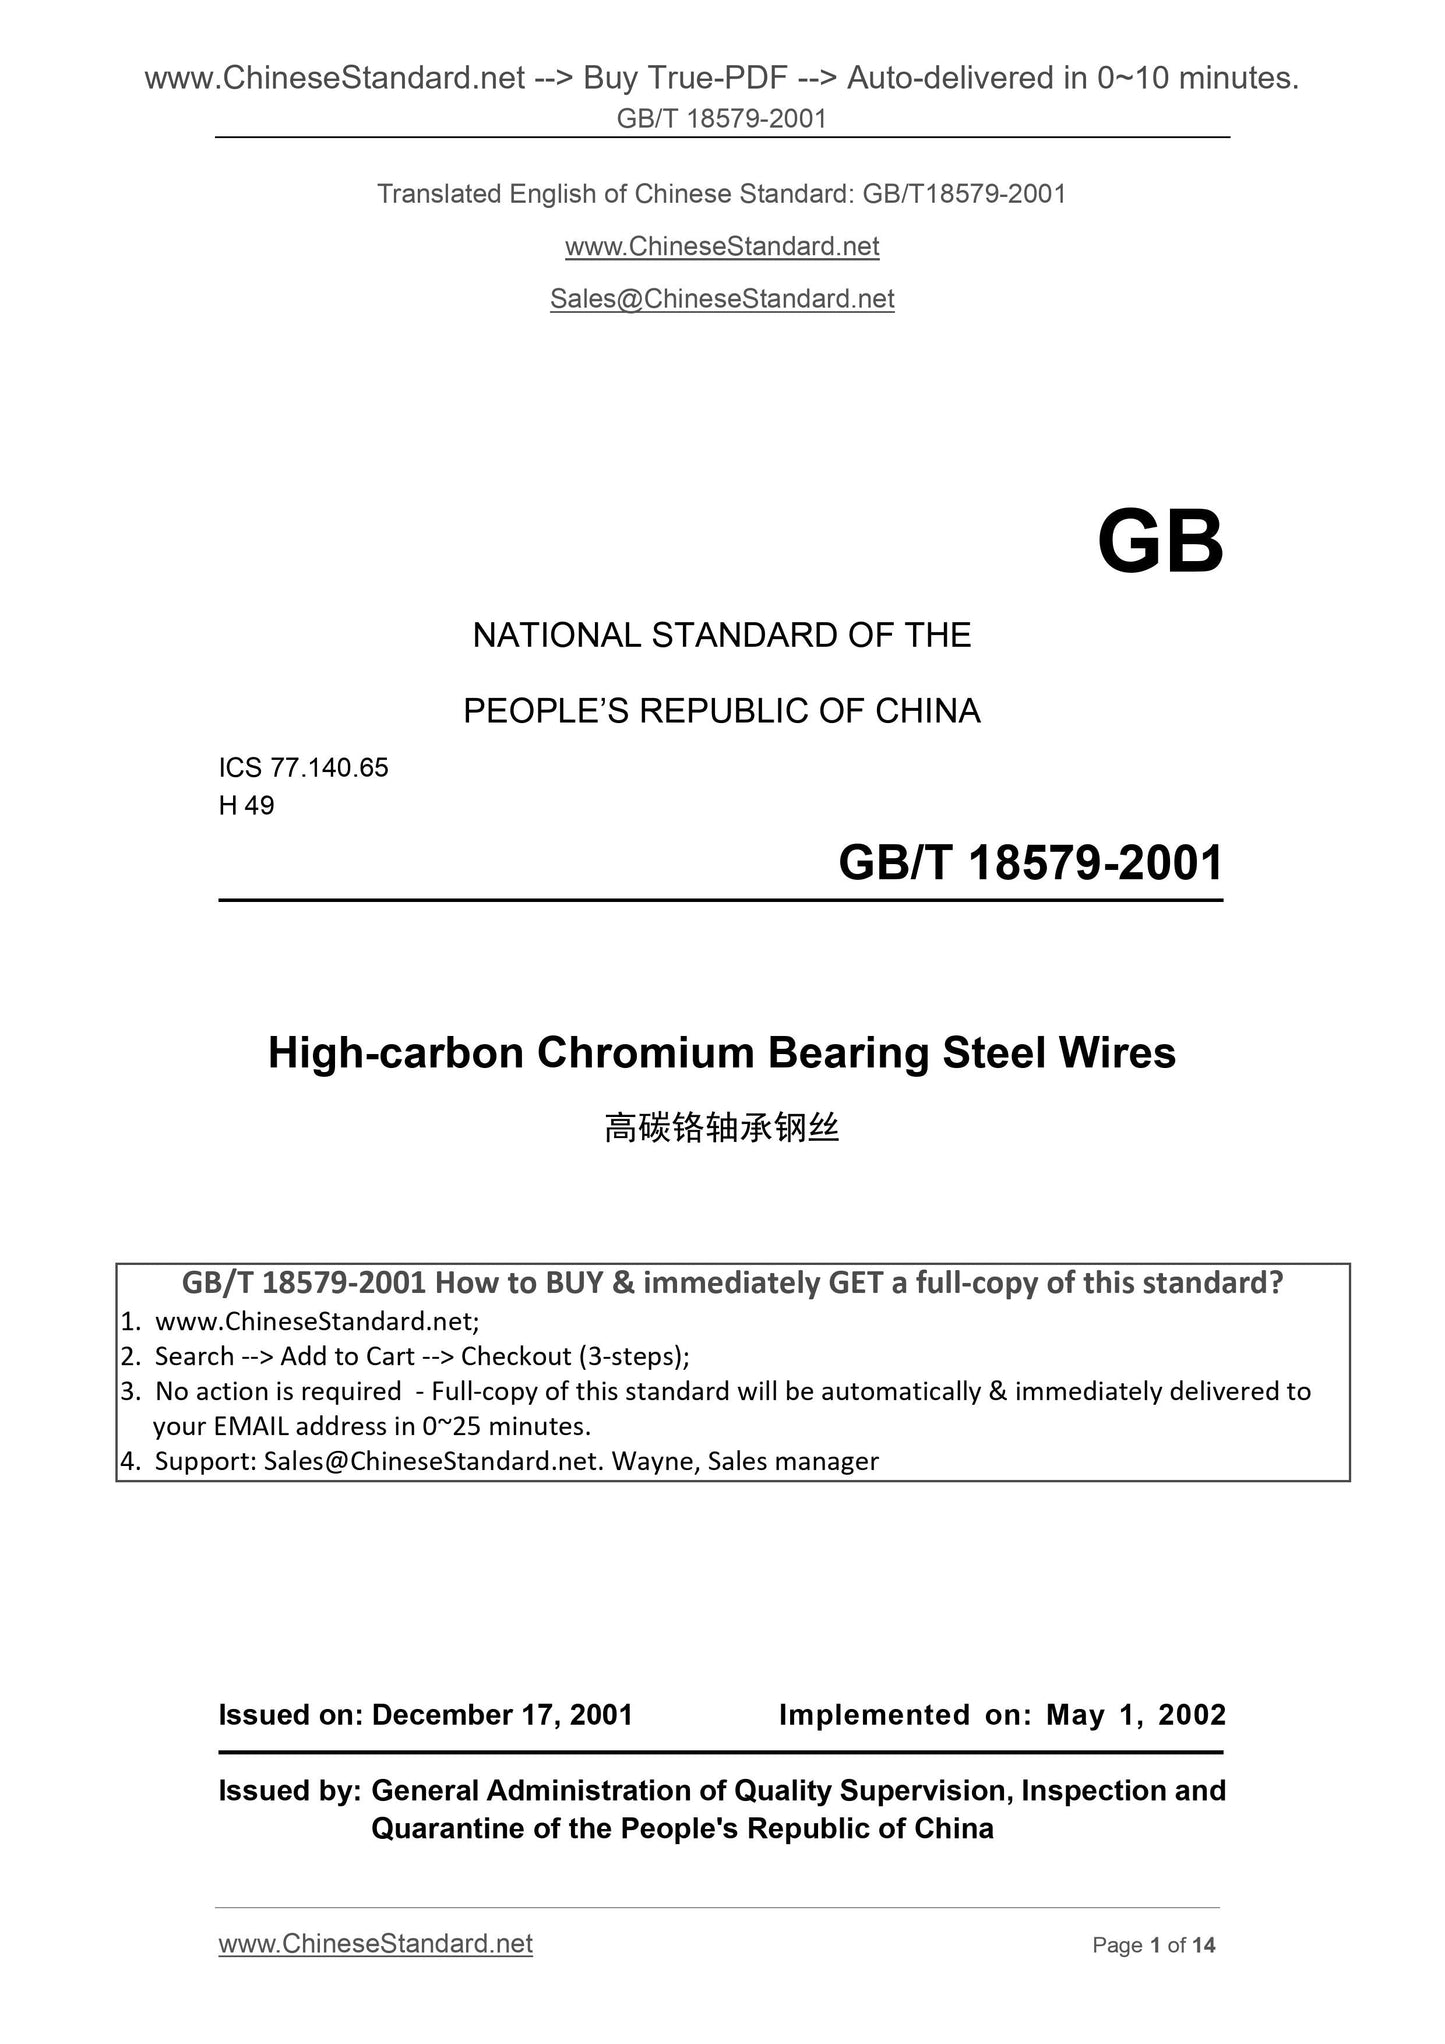 GB/T 18579-2001 Page 1